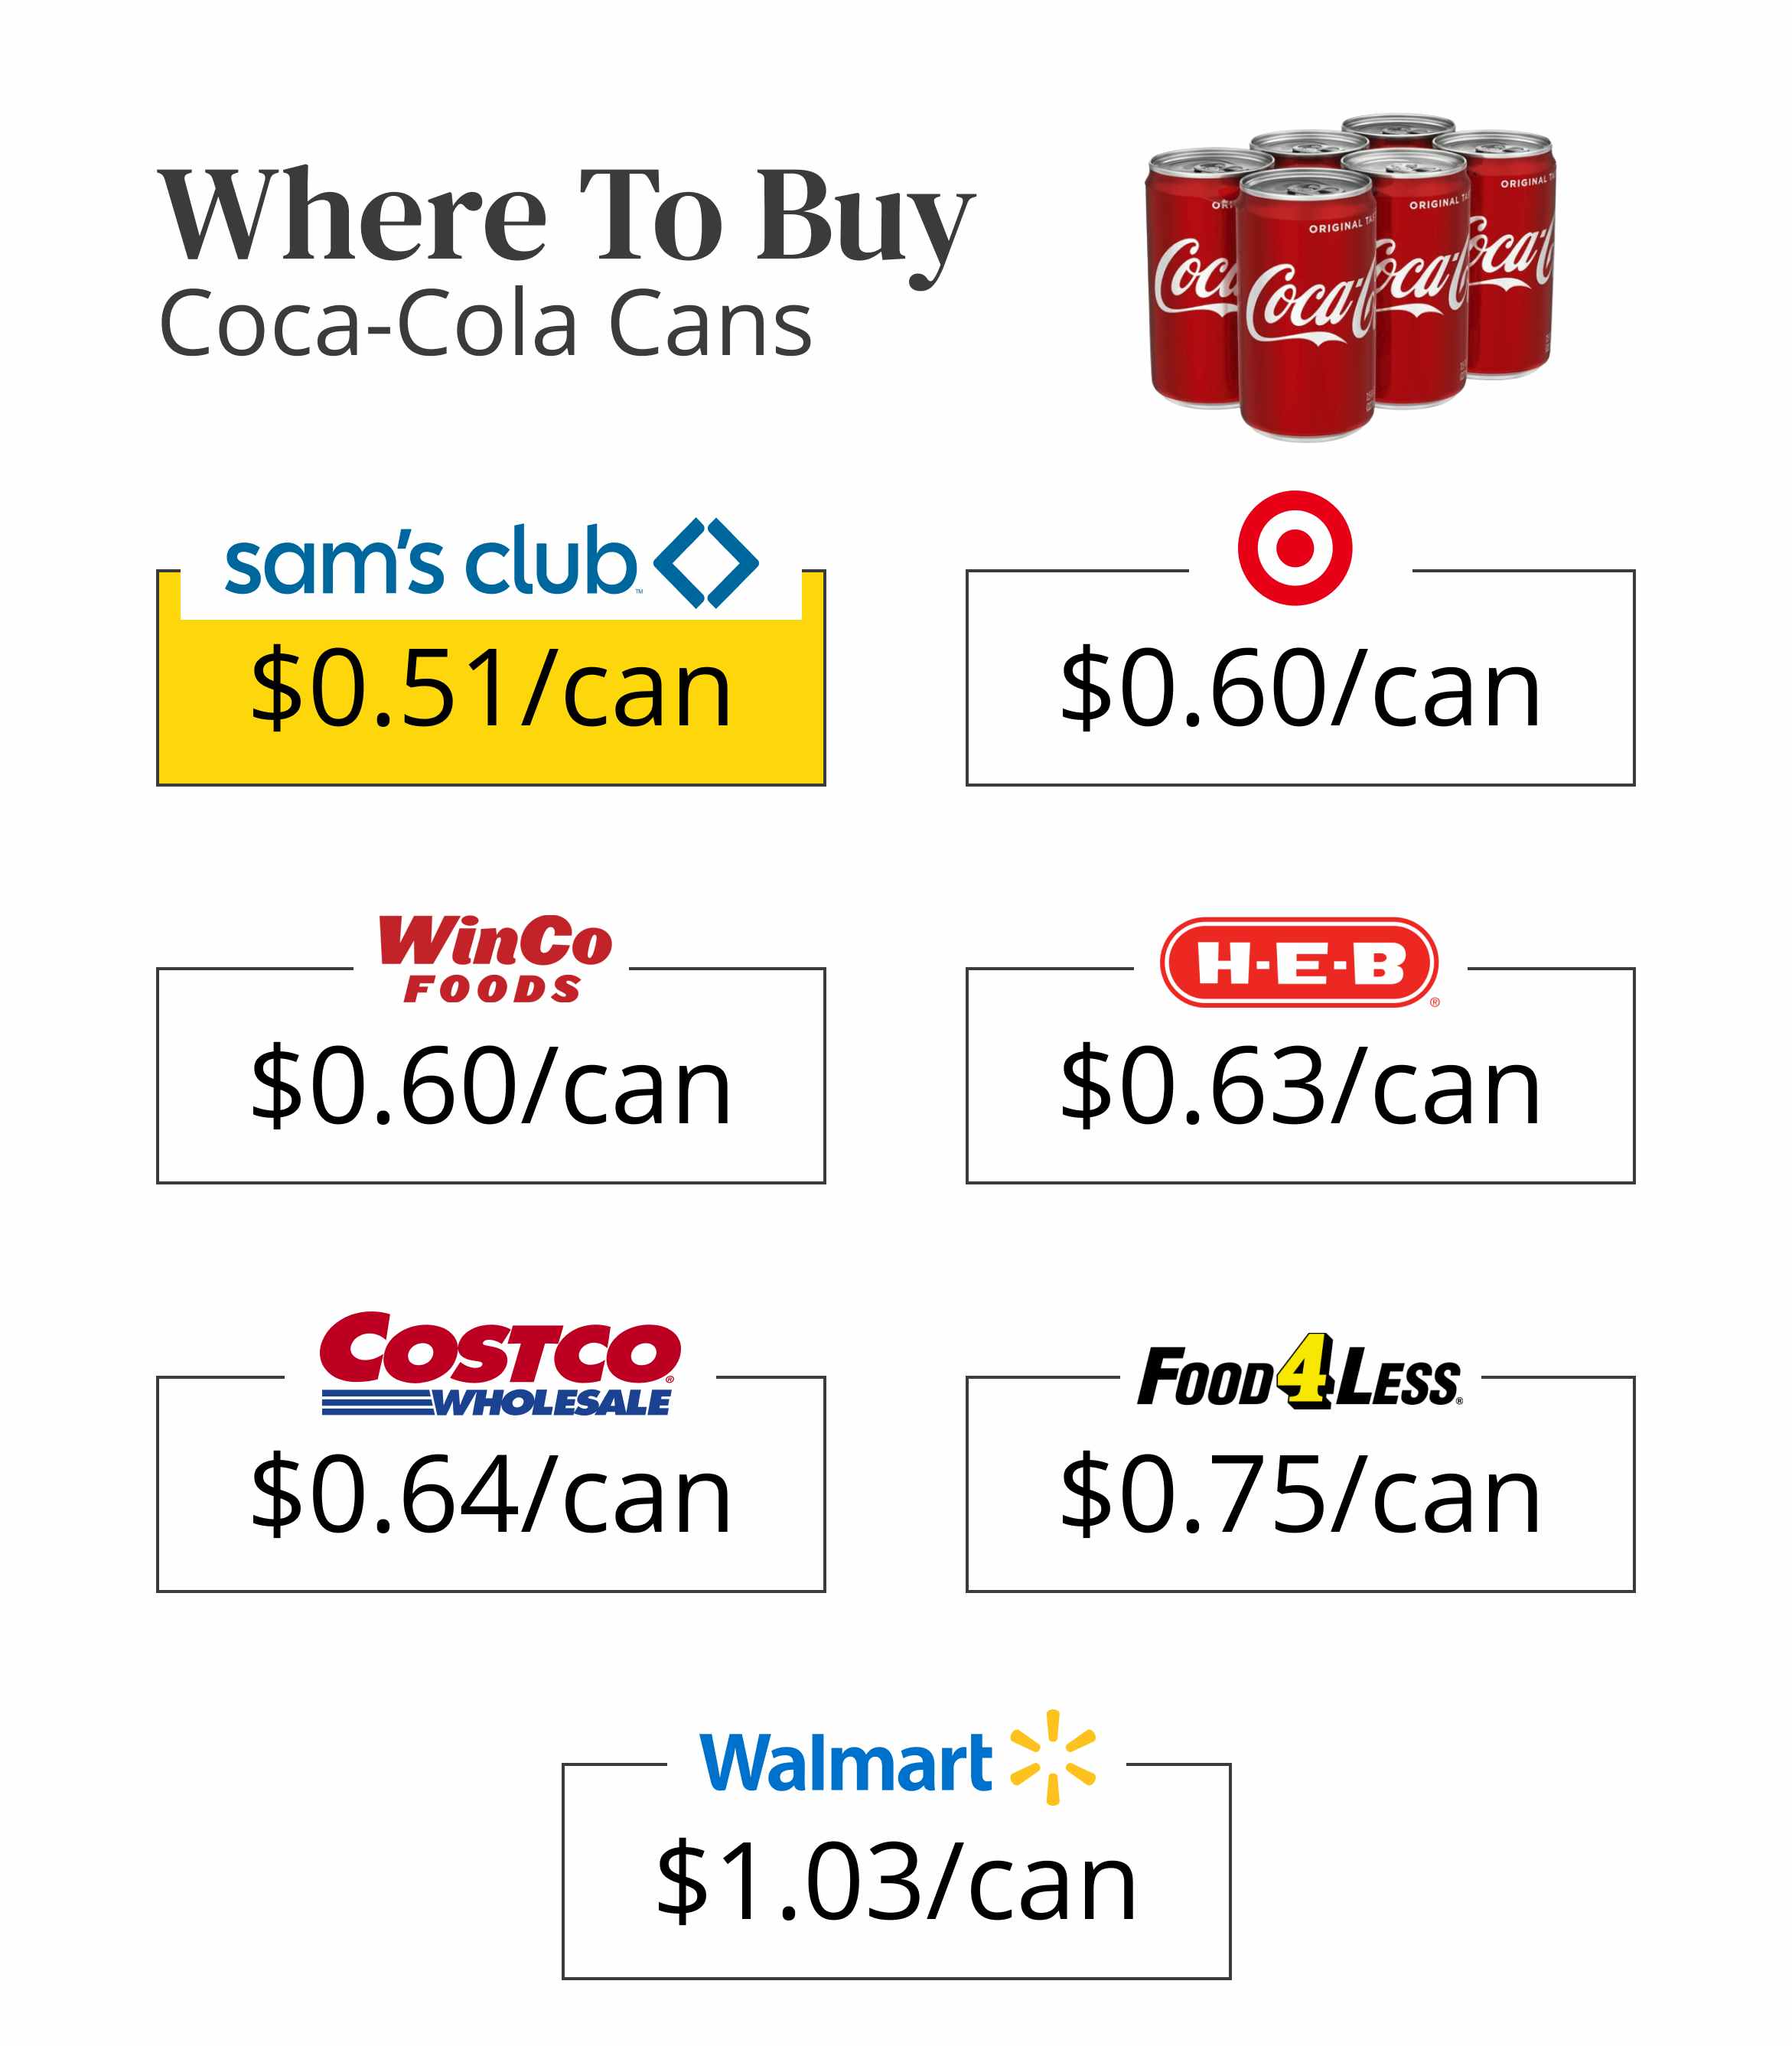 Where to buy coco cola cans graphic 